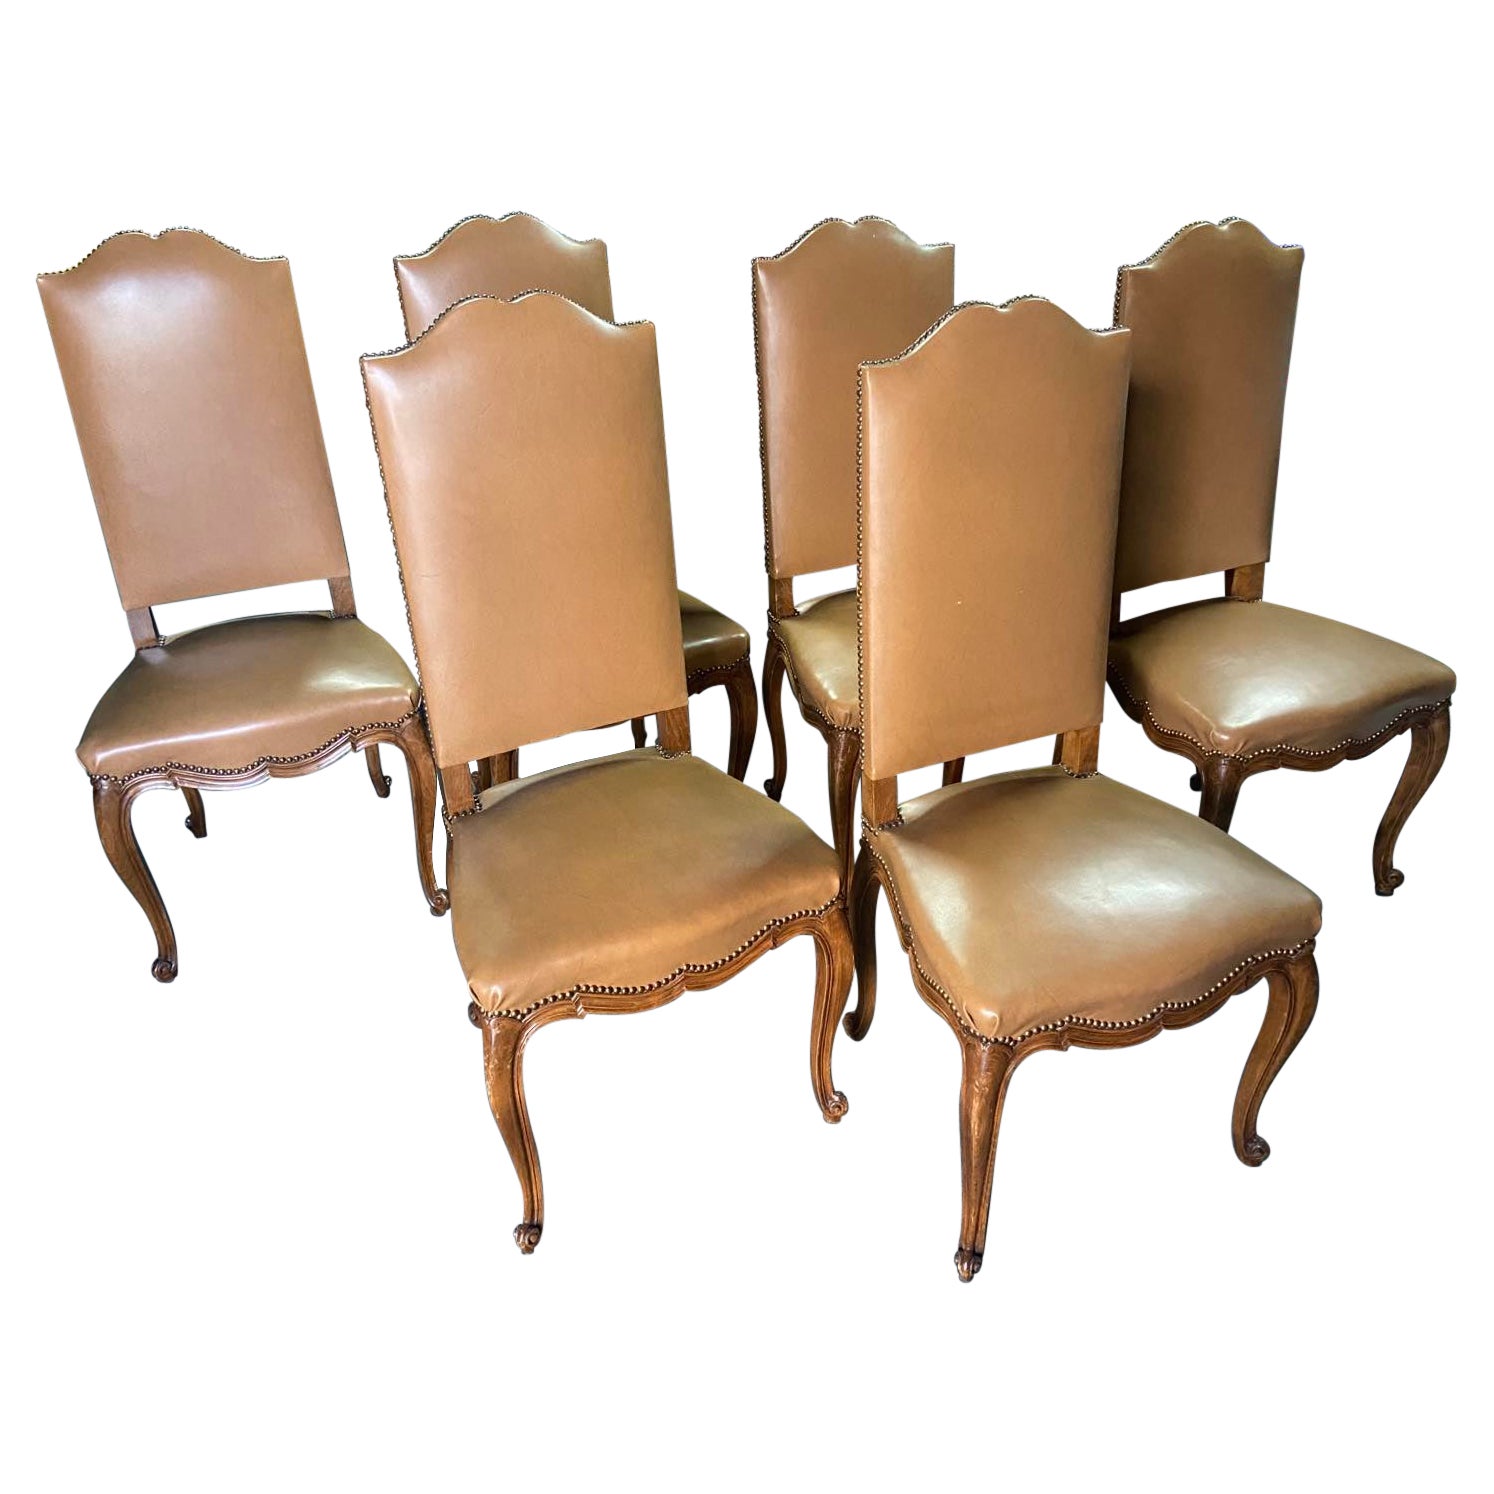 20th Century French Hand Carved Walnut Dining Chairs in the Style of Louis XV